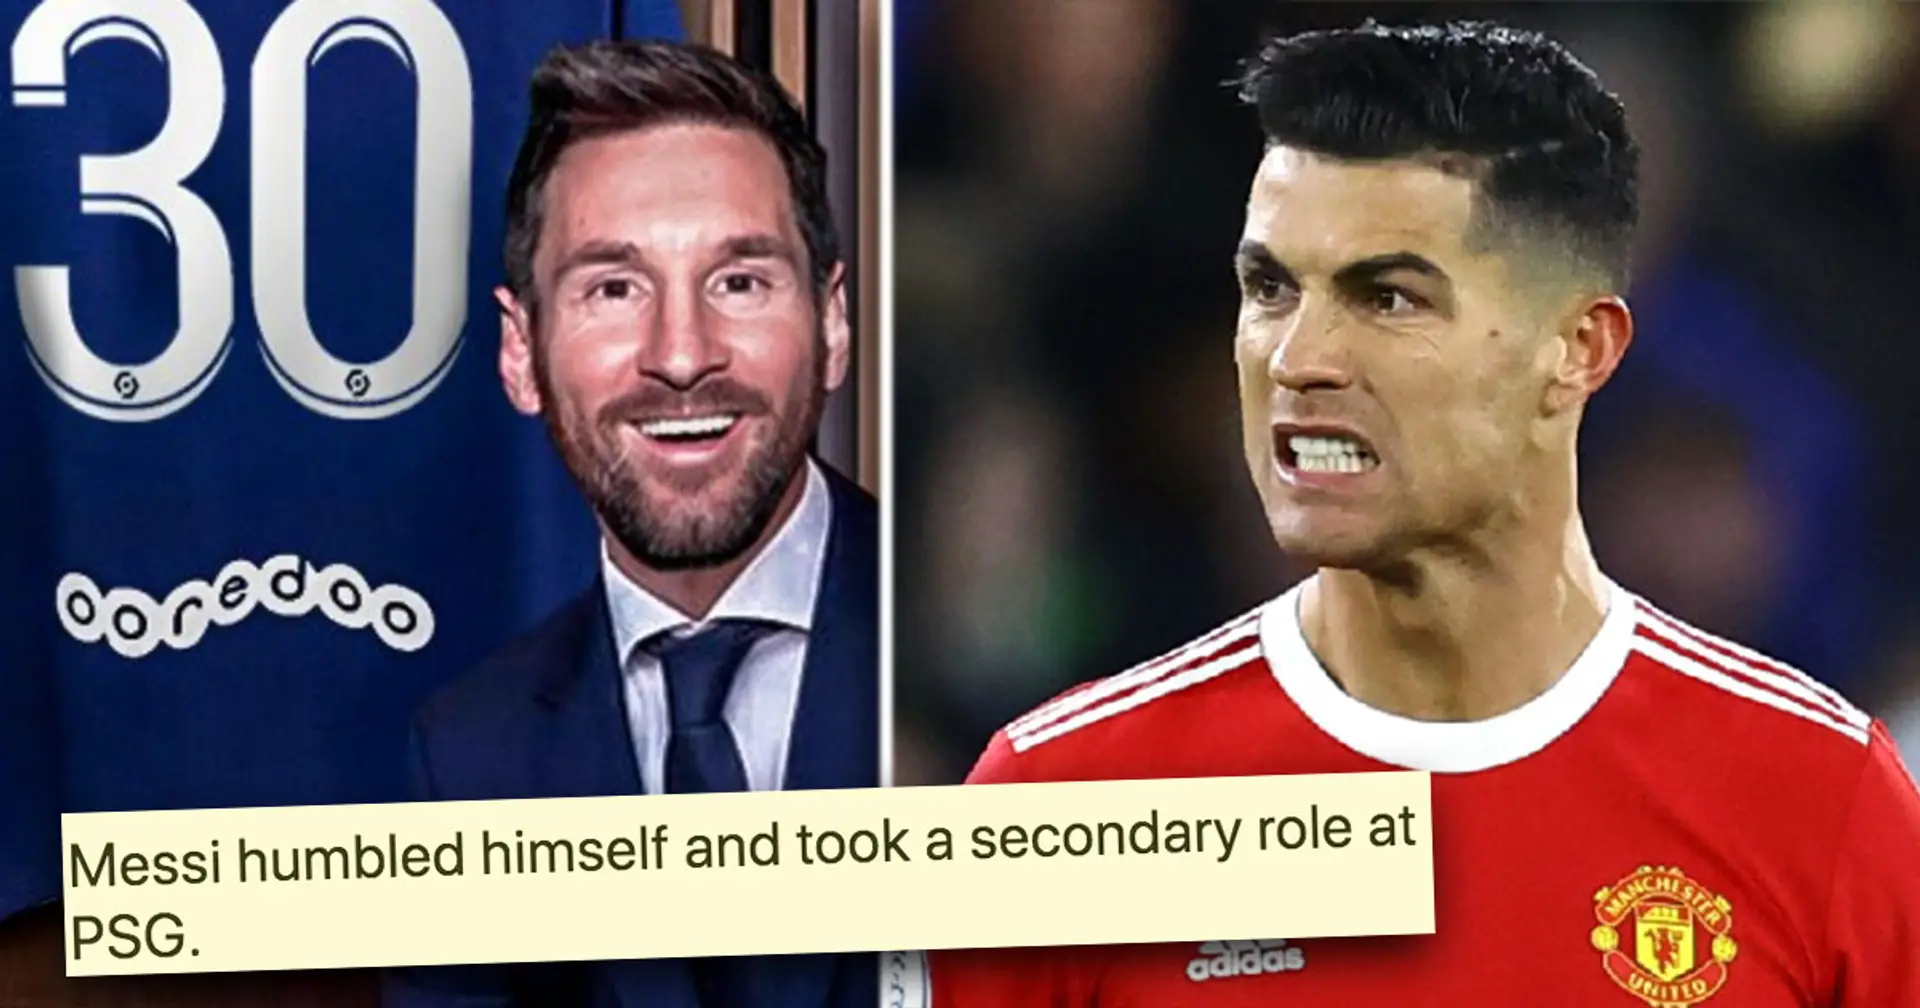 Ronaldo tells Man Utd he wants to leave after challenging season – fan believes this puts end to GOAT debate